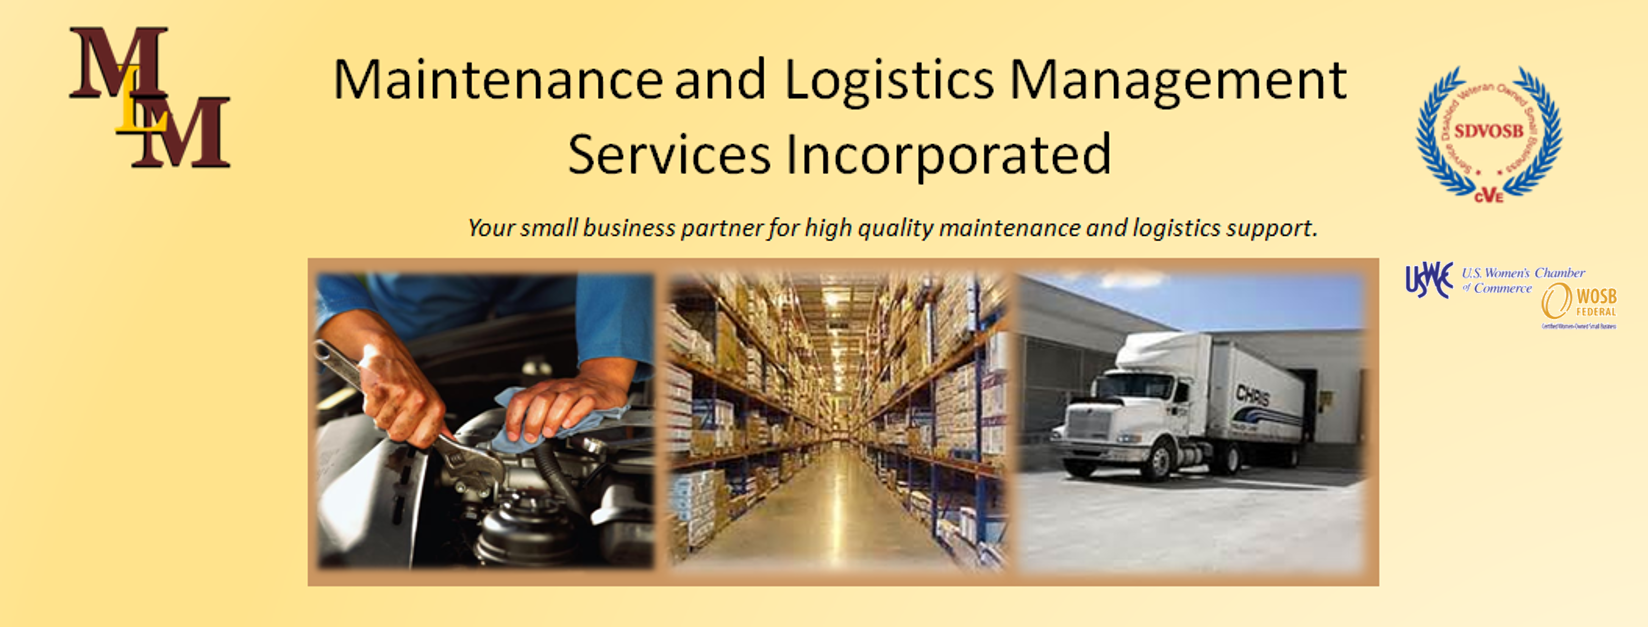 Maintenance and Logistics Management Services Incorporated